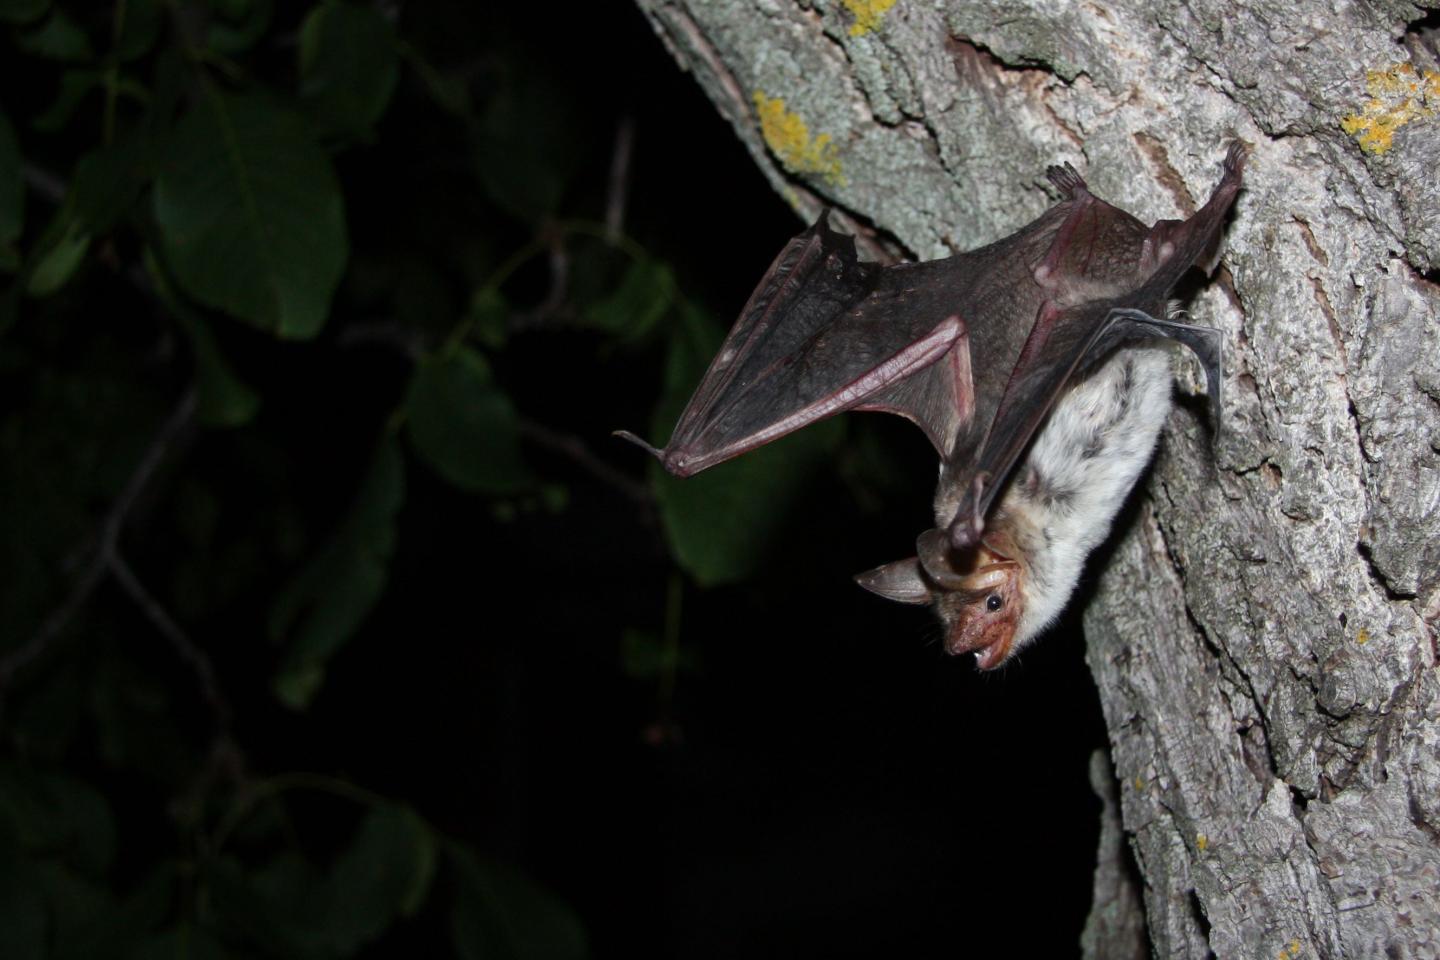 Smooth, Manmade Surfaces Create a "Blind Spot" for Bats Using Echolocation